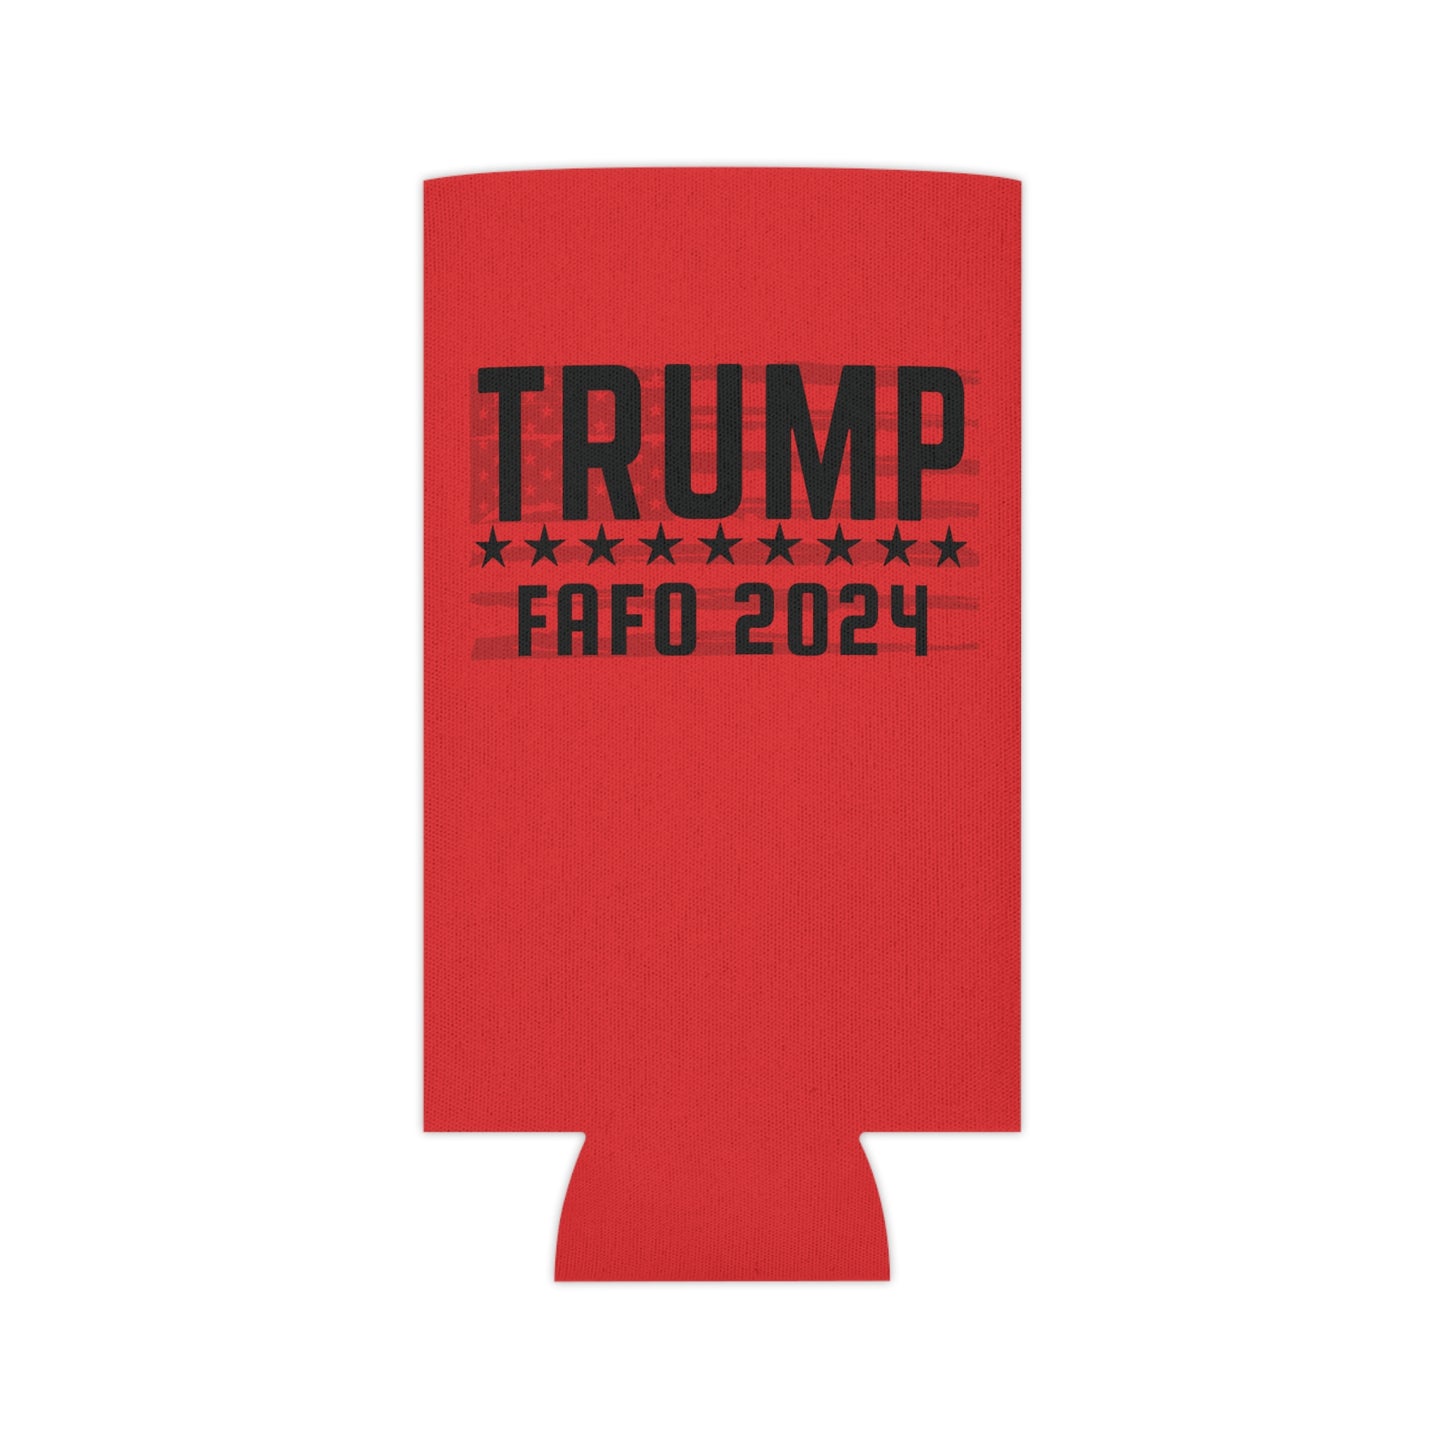 TRUMP FAFO 2024 Can Cooler